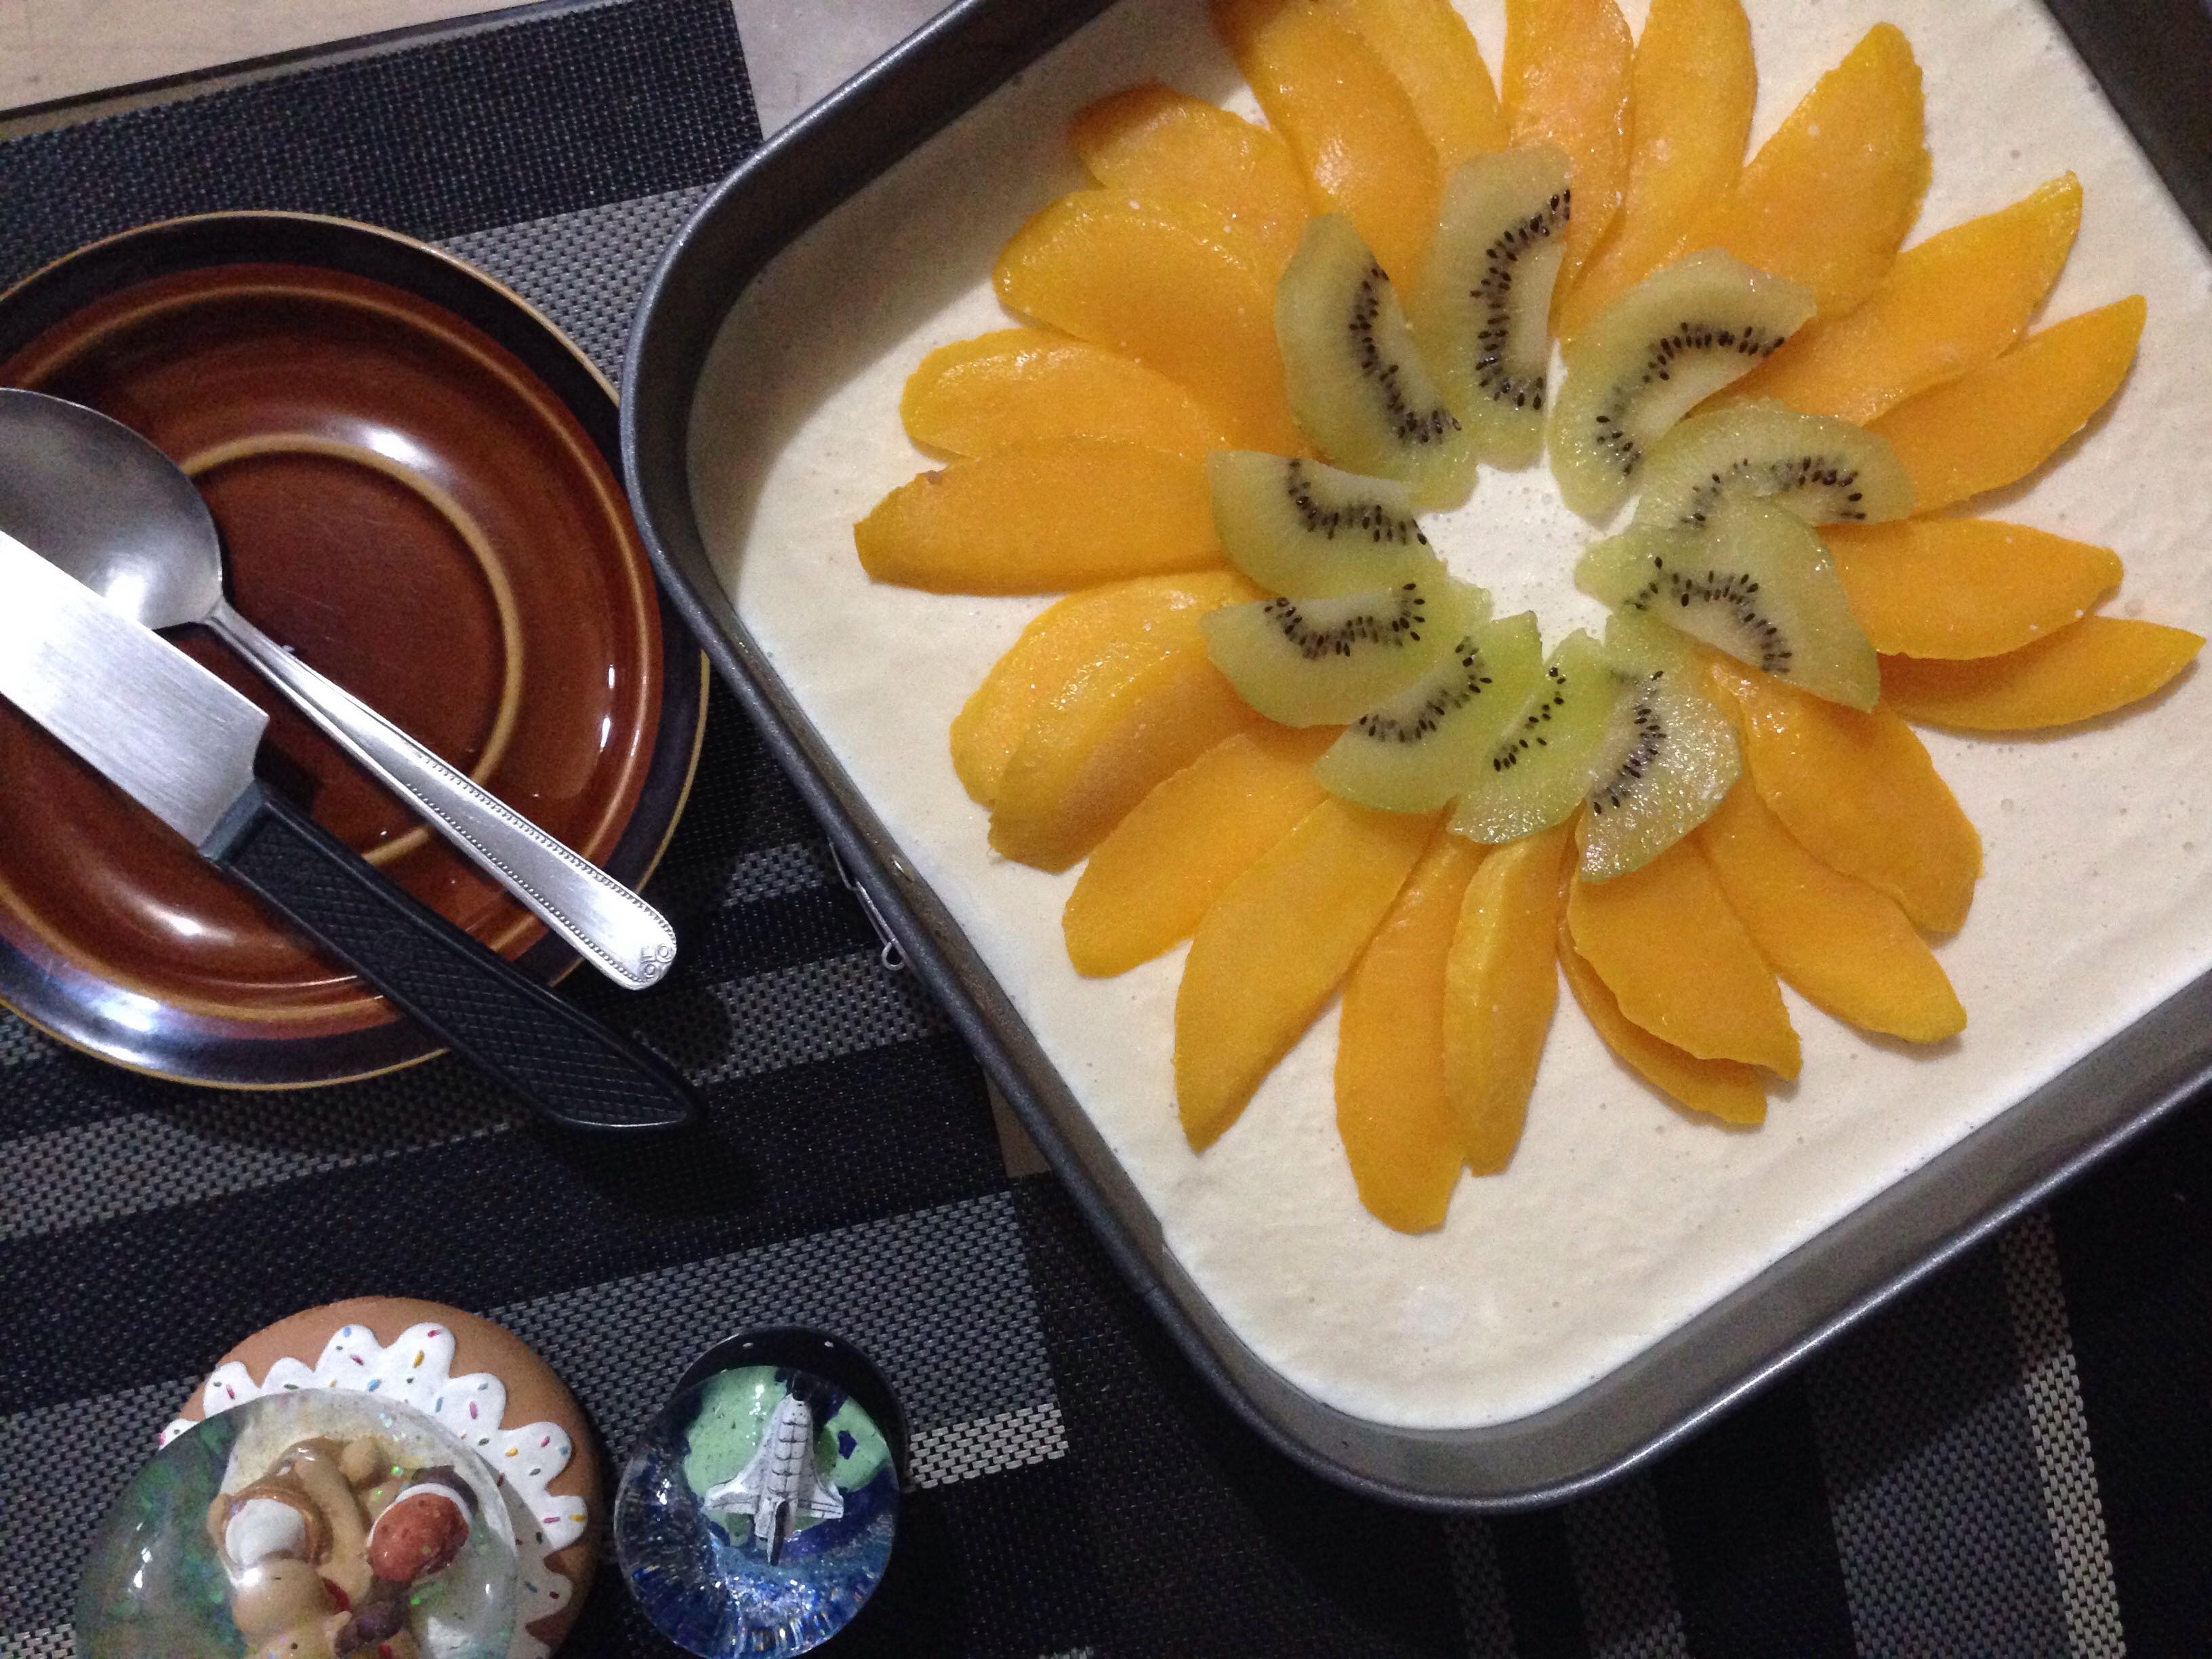 <p>A cool, creamy dessert with Caribbean flair. Reviewer IAMBROODING gives this recipe five stars: "Can I give this one another star? It really is an awesome and easy cheesecake. The mango topping is to die for and so easy to make!"</p>
                          